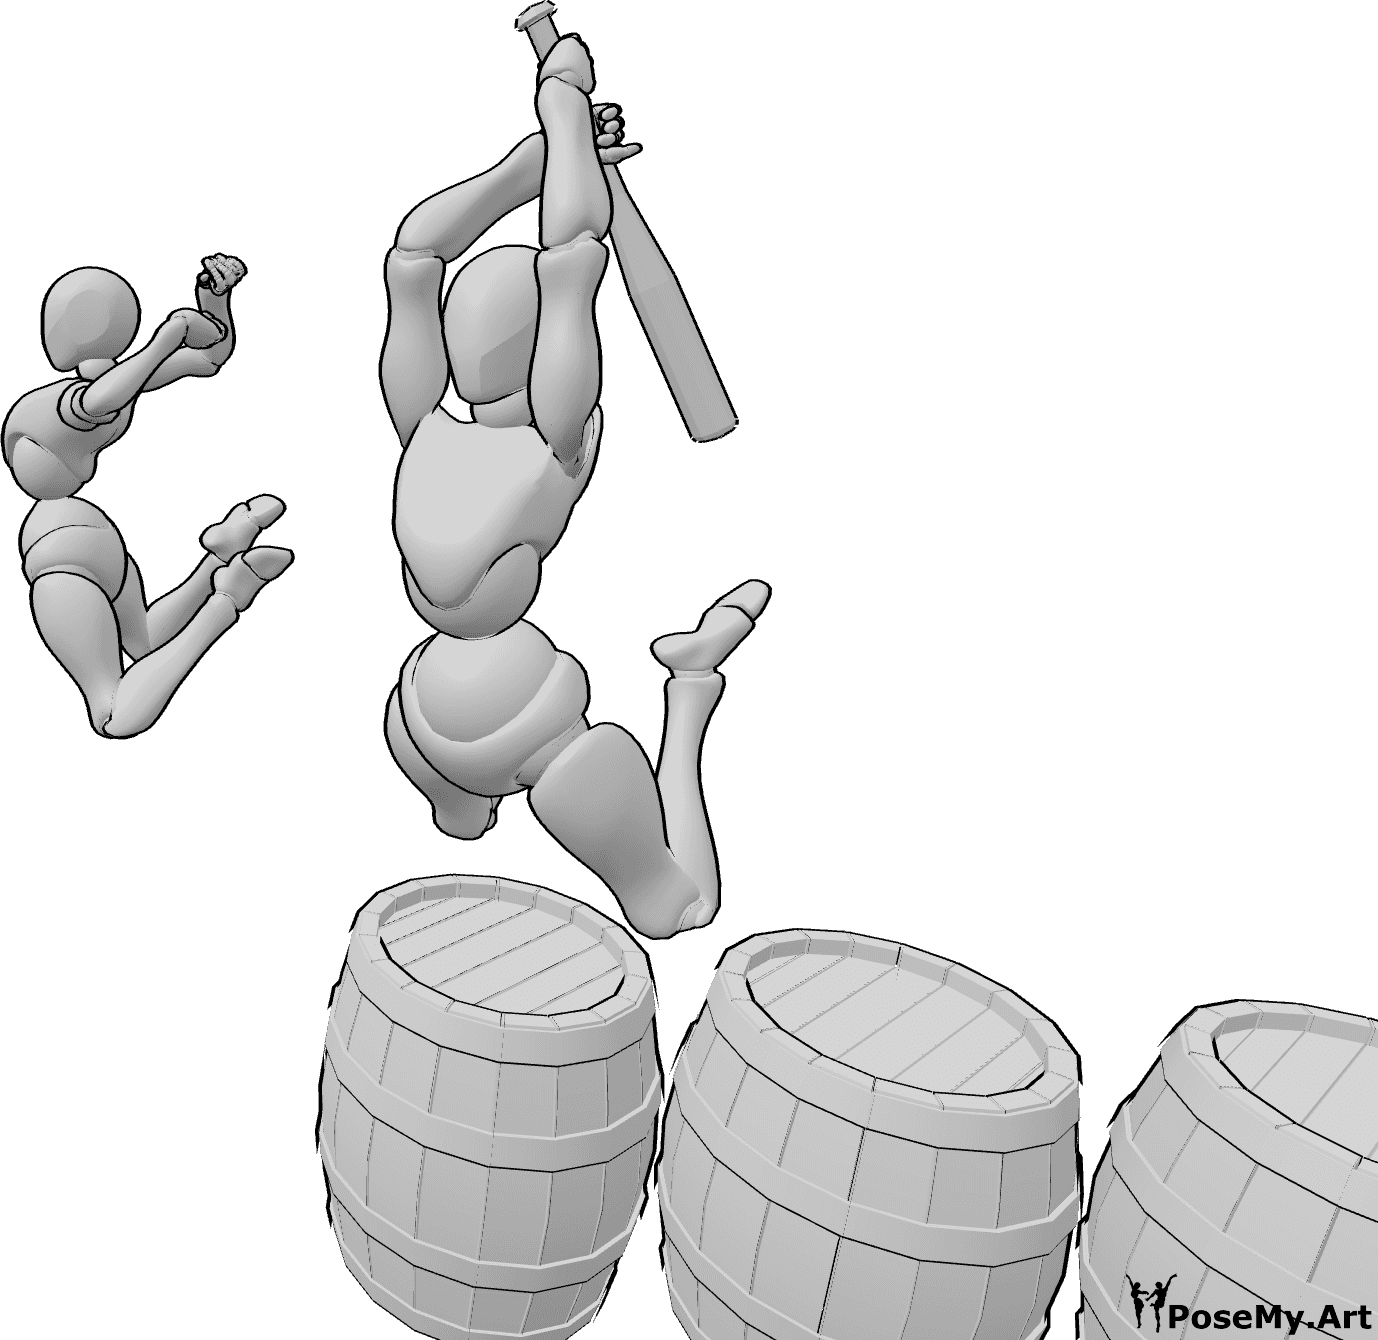 Pose Reference- women jump attack from barrels - two women jump from barrels, one with bat, legs to the back